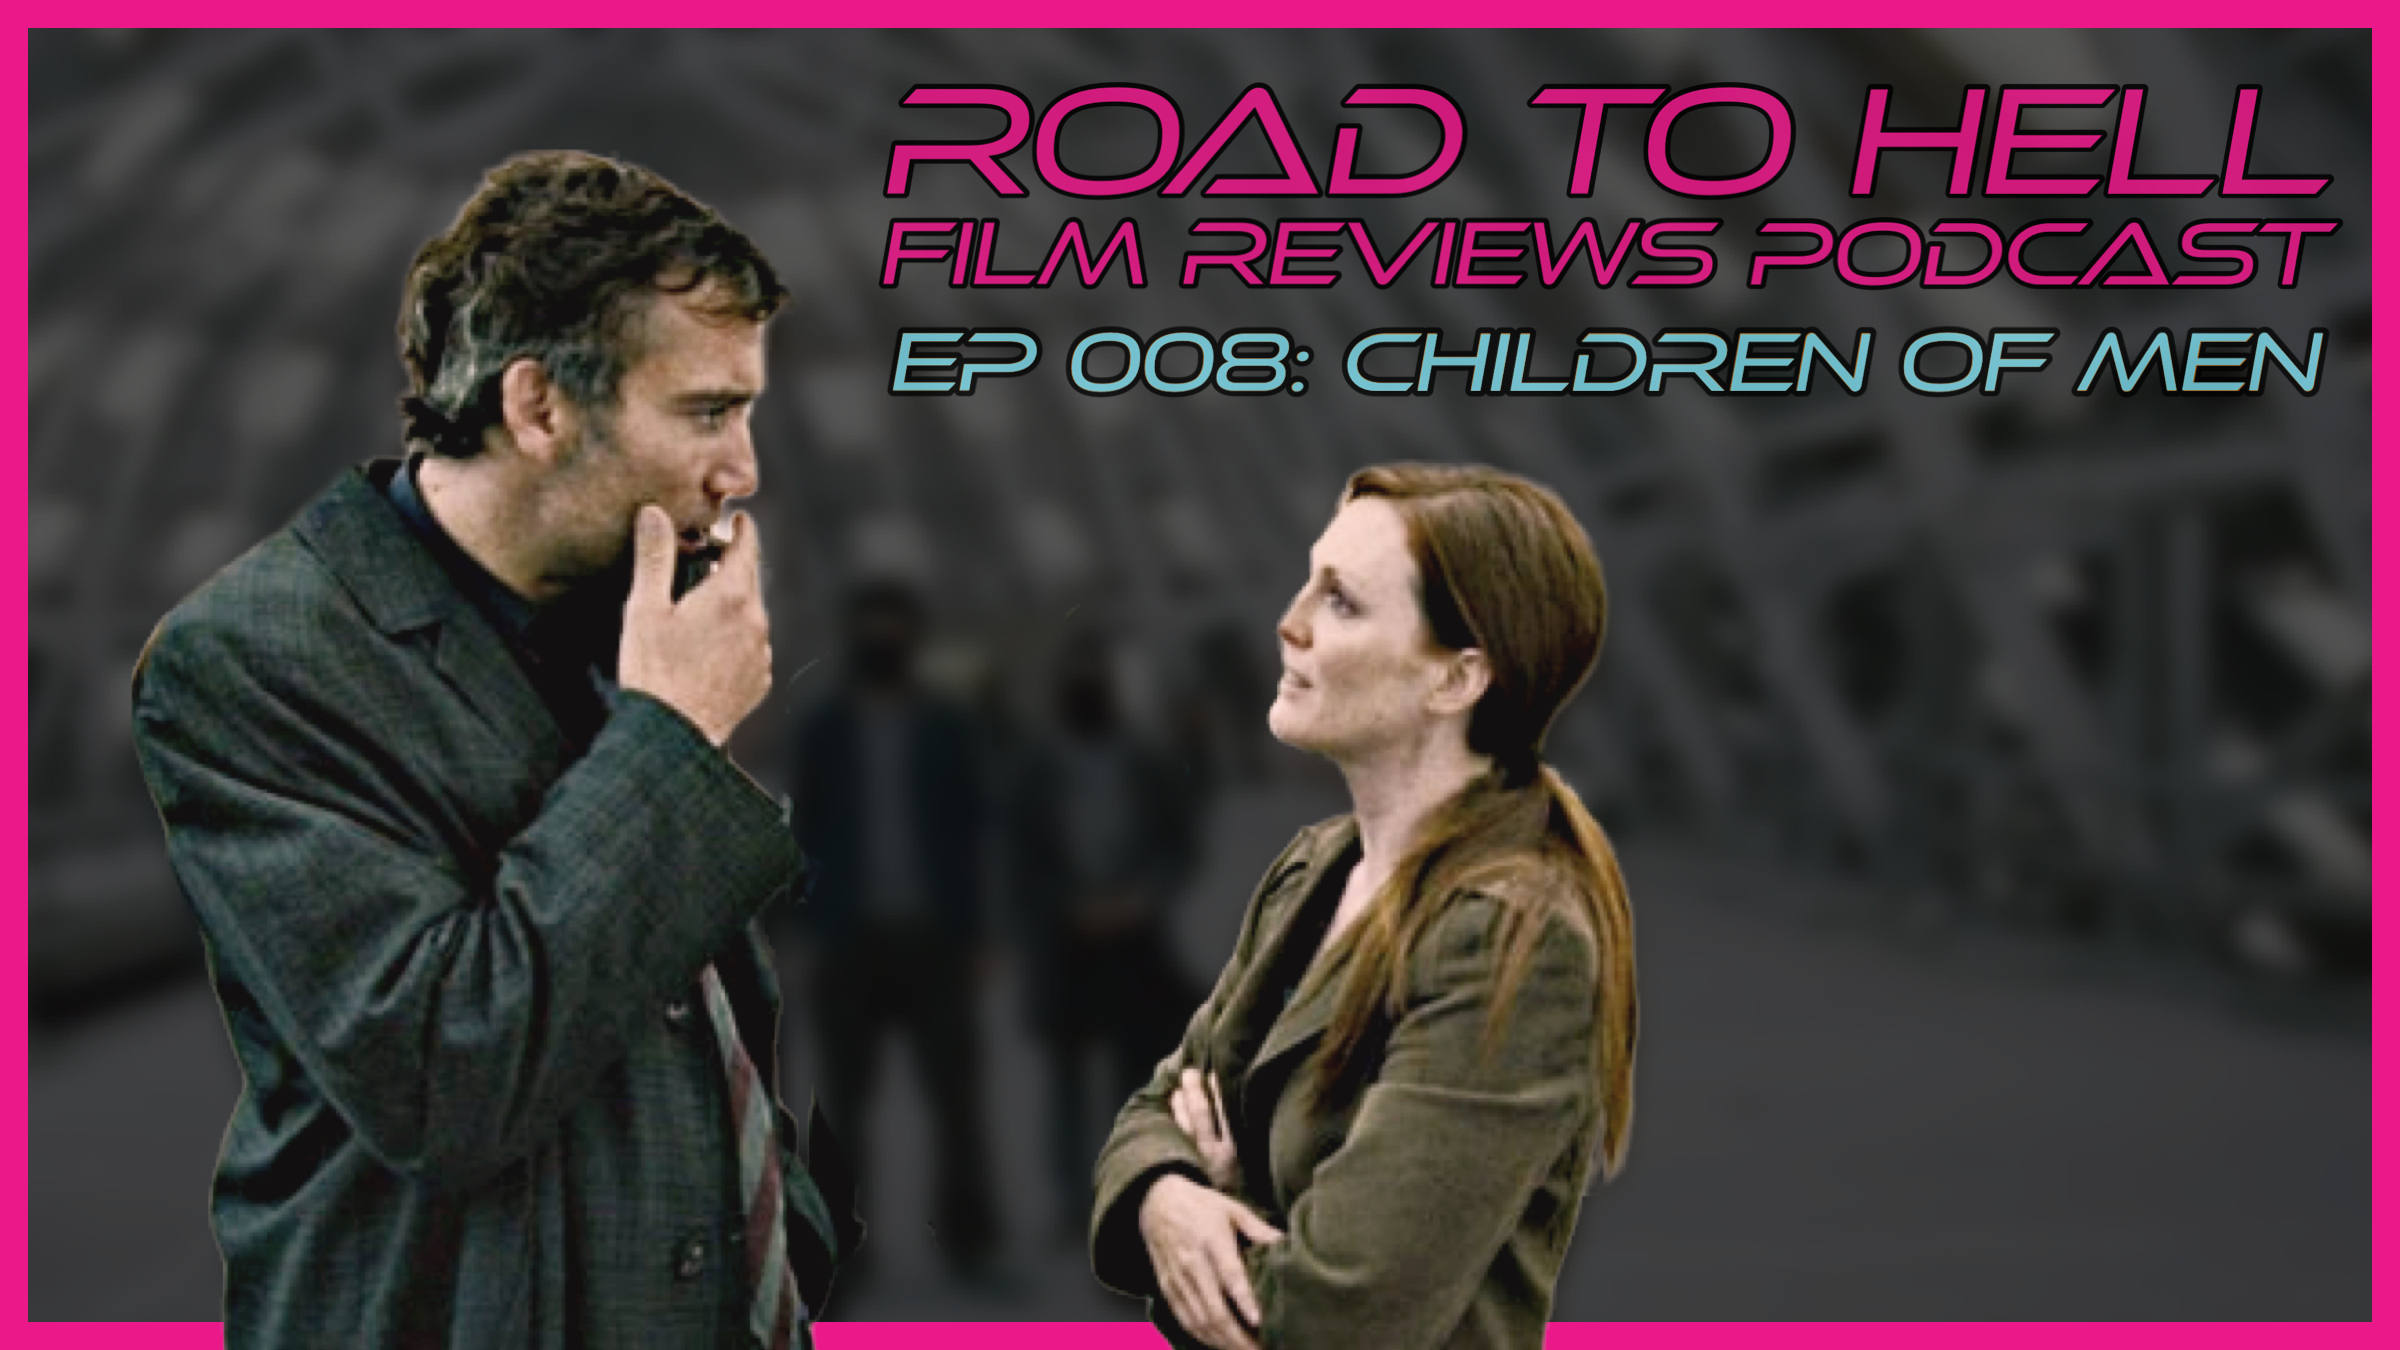 Children Of Men Review: Road To Hell Film Reviews Episode 008